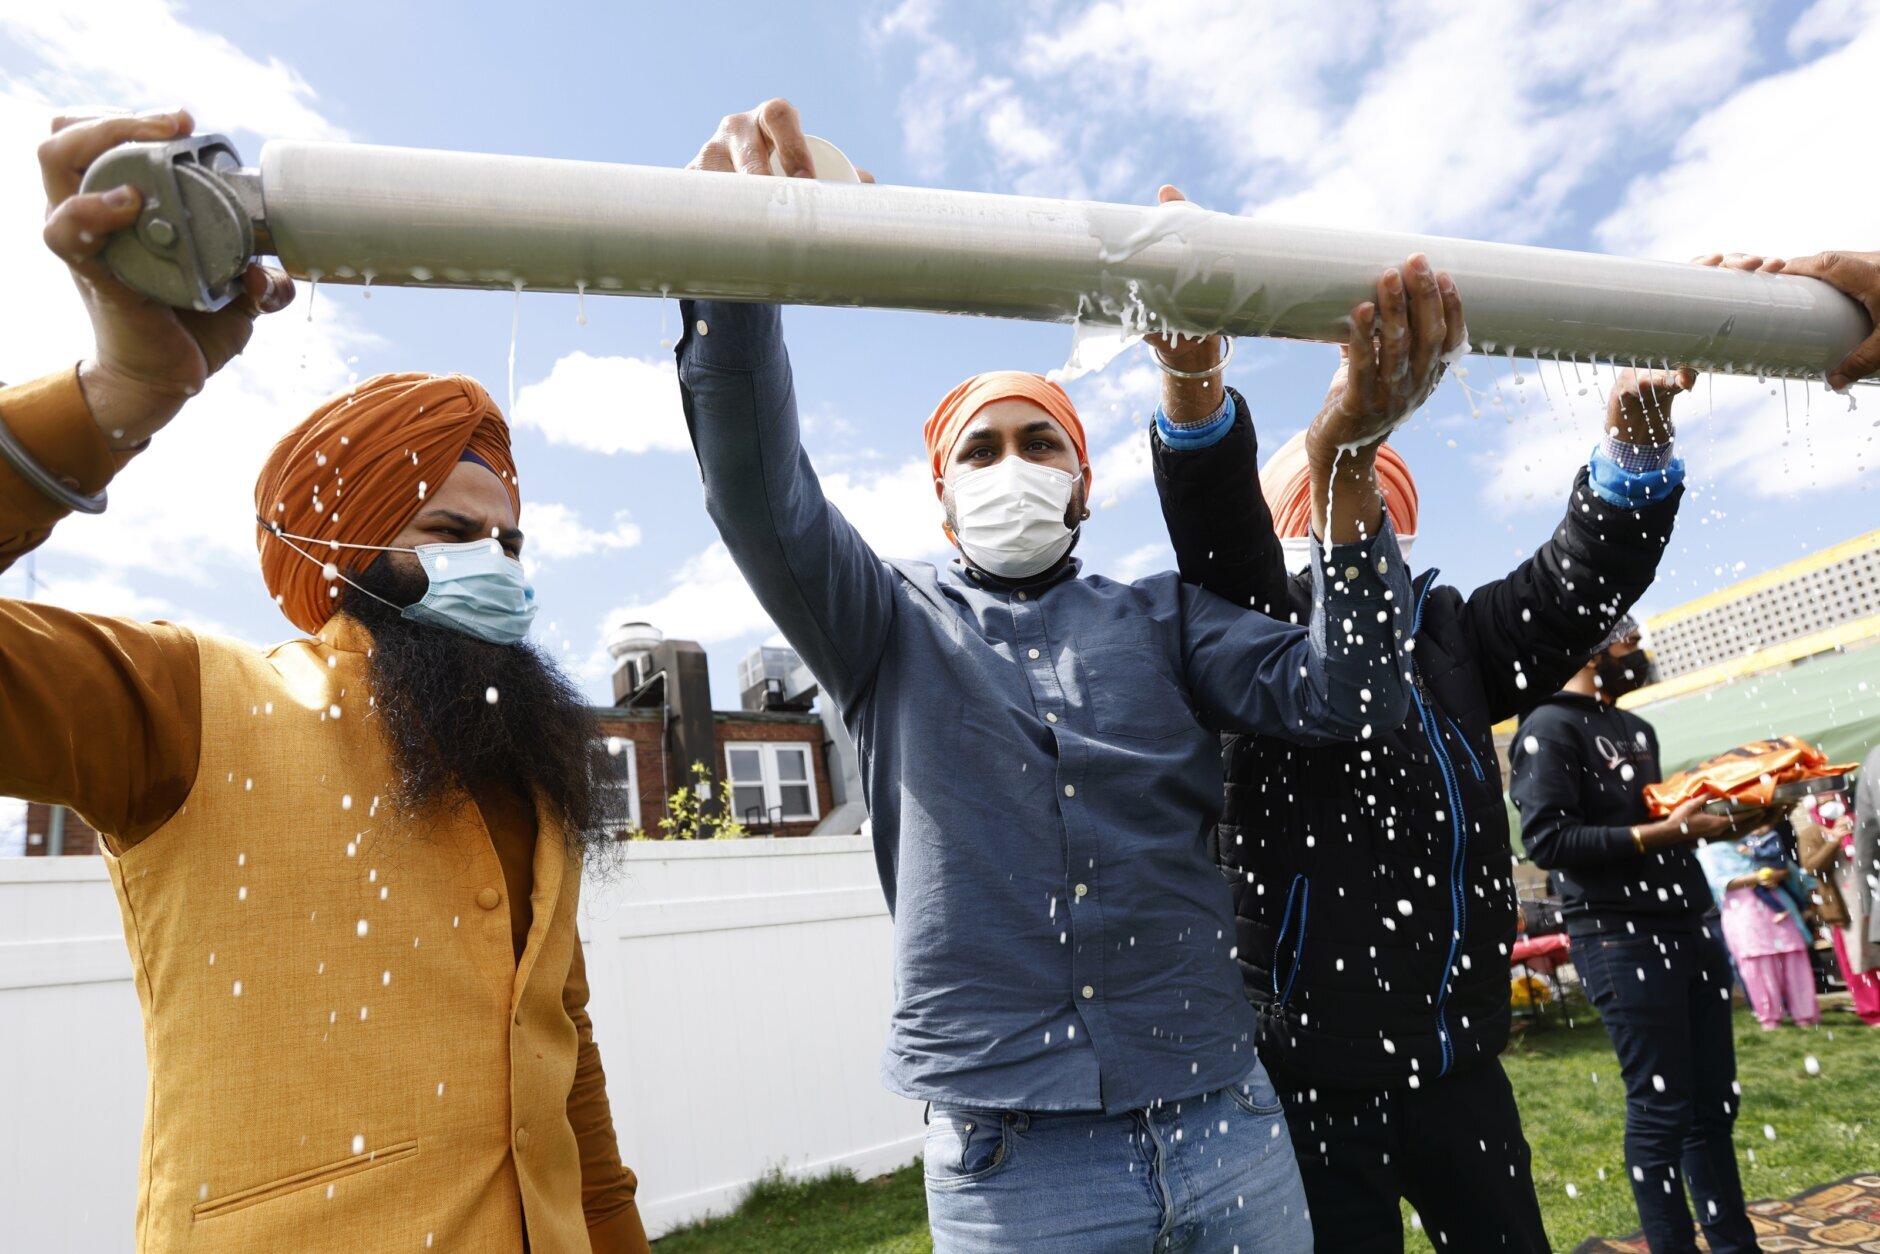 FILE - Jasbir Singh, left, and Vijay Singh wash a flagpole with milk as part of a ceremonial changing of the Sikh flag during Vaisakhi celebrations at Guru Nanak Darbar of Long Island, Tuesday, April 13, 2021 in Hicksville, N.Y. In a convergence that happens only rarely, Judaism’s Passover, Christianity’s Easter and Islam’s holy month of Ramadan are interlapping in April with holy days for Buddhists, Baha’is, Sikhs, Jains and Hindus, offering different faith groups a chance to share meals and rituals in a range of interfaith events. (AP Photo/Jason DeCrow, File)